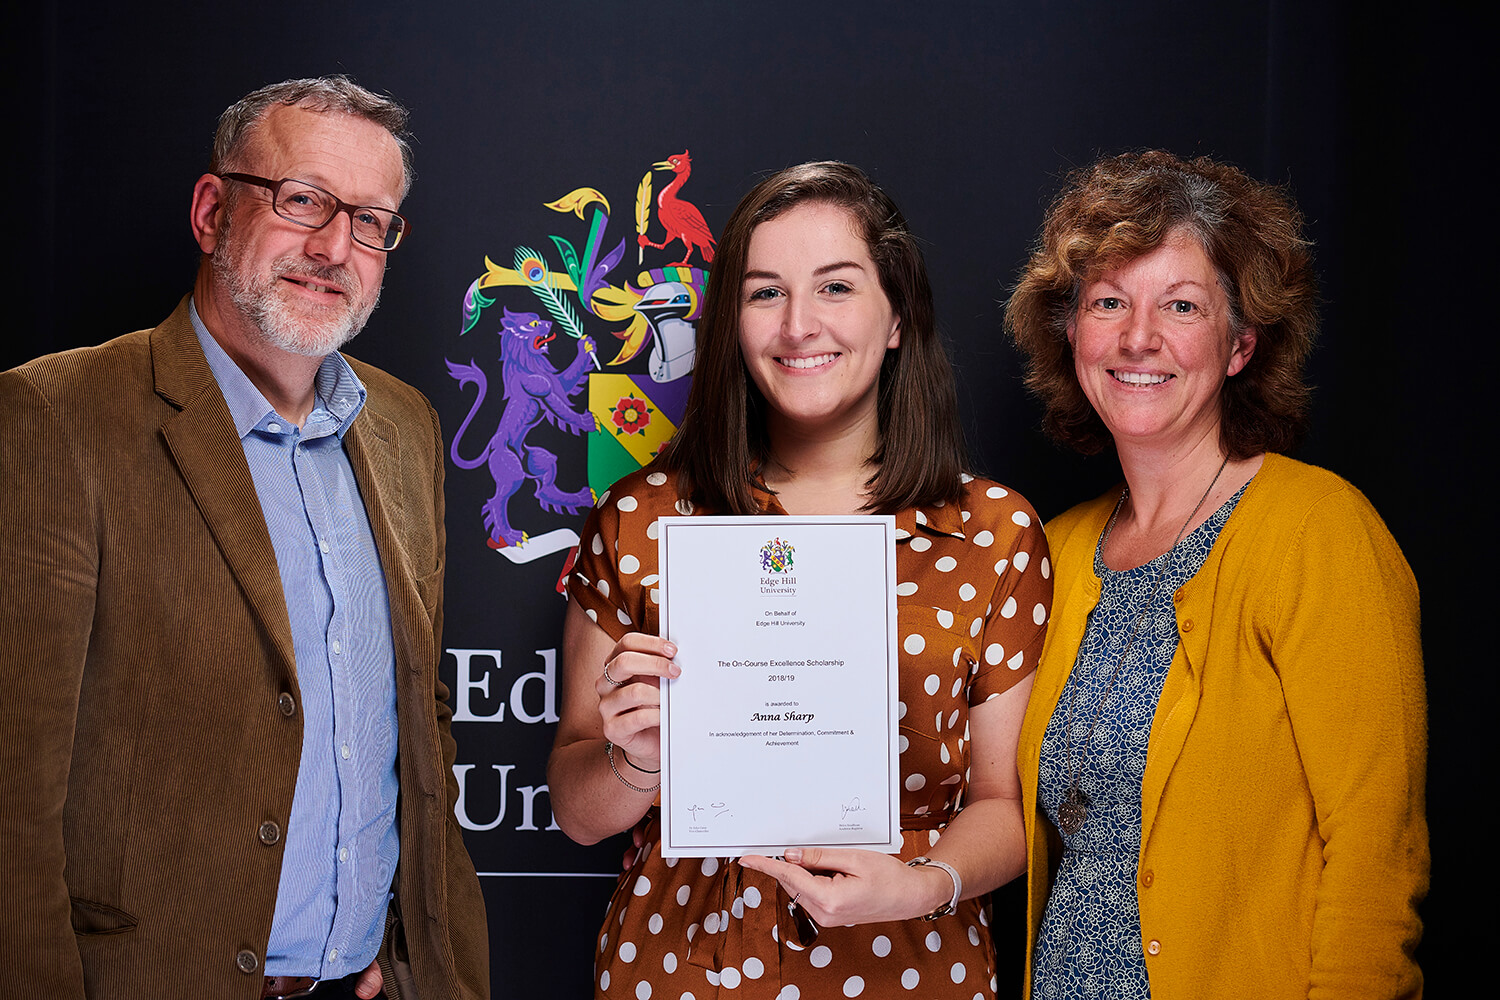 Scholarship winner Anna Sharp, with her family, shows off her certificate while attending a Scholarship Awards Evening.